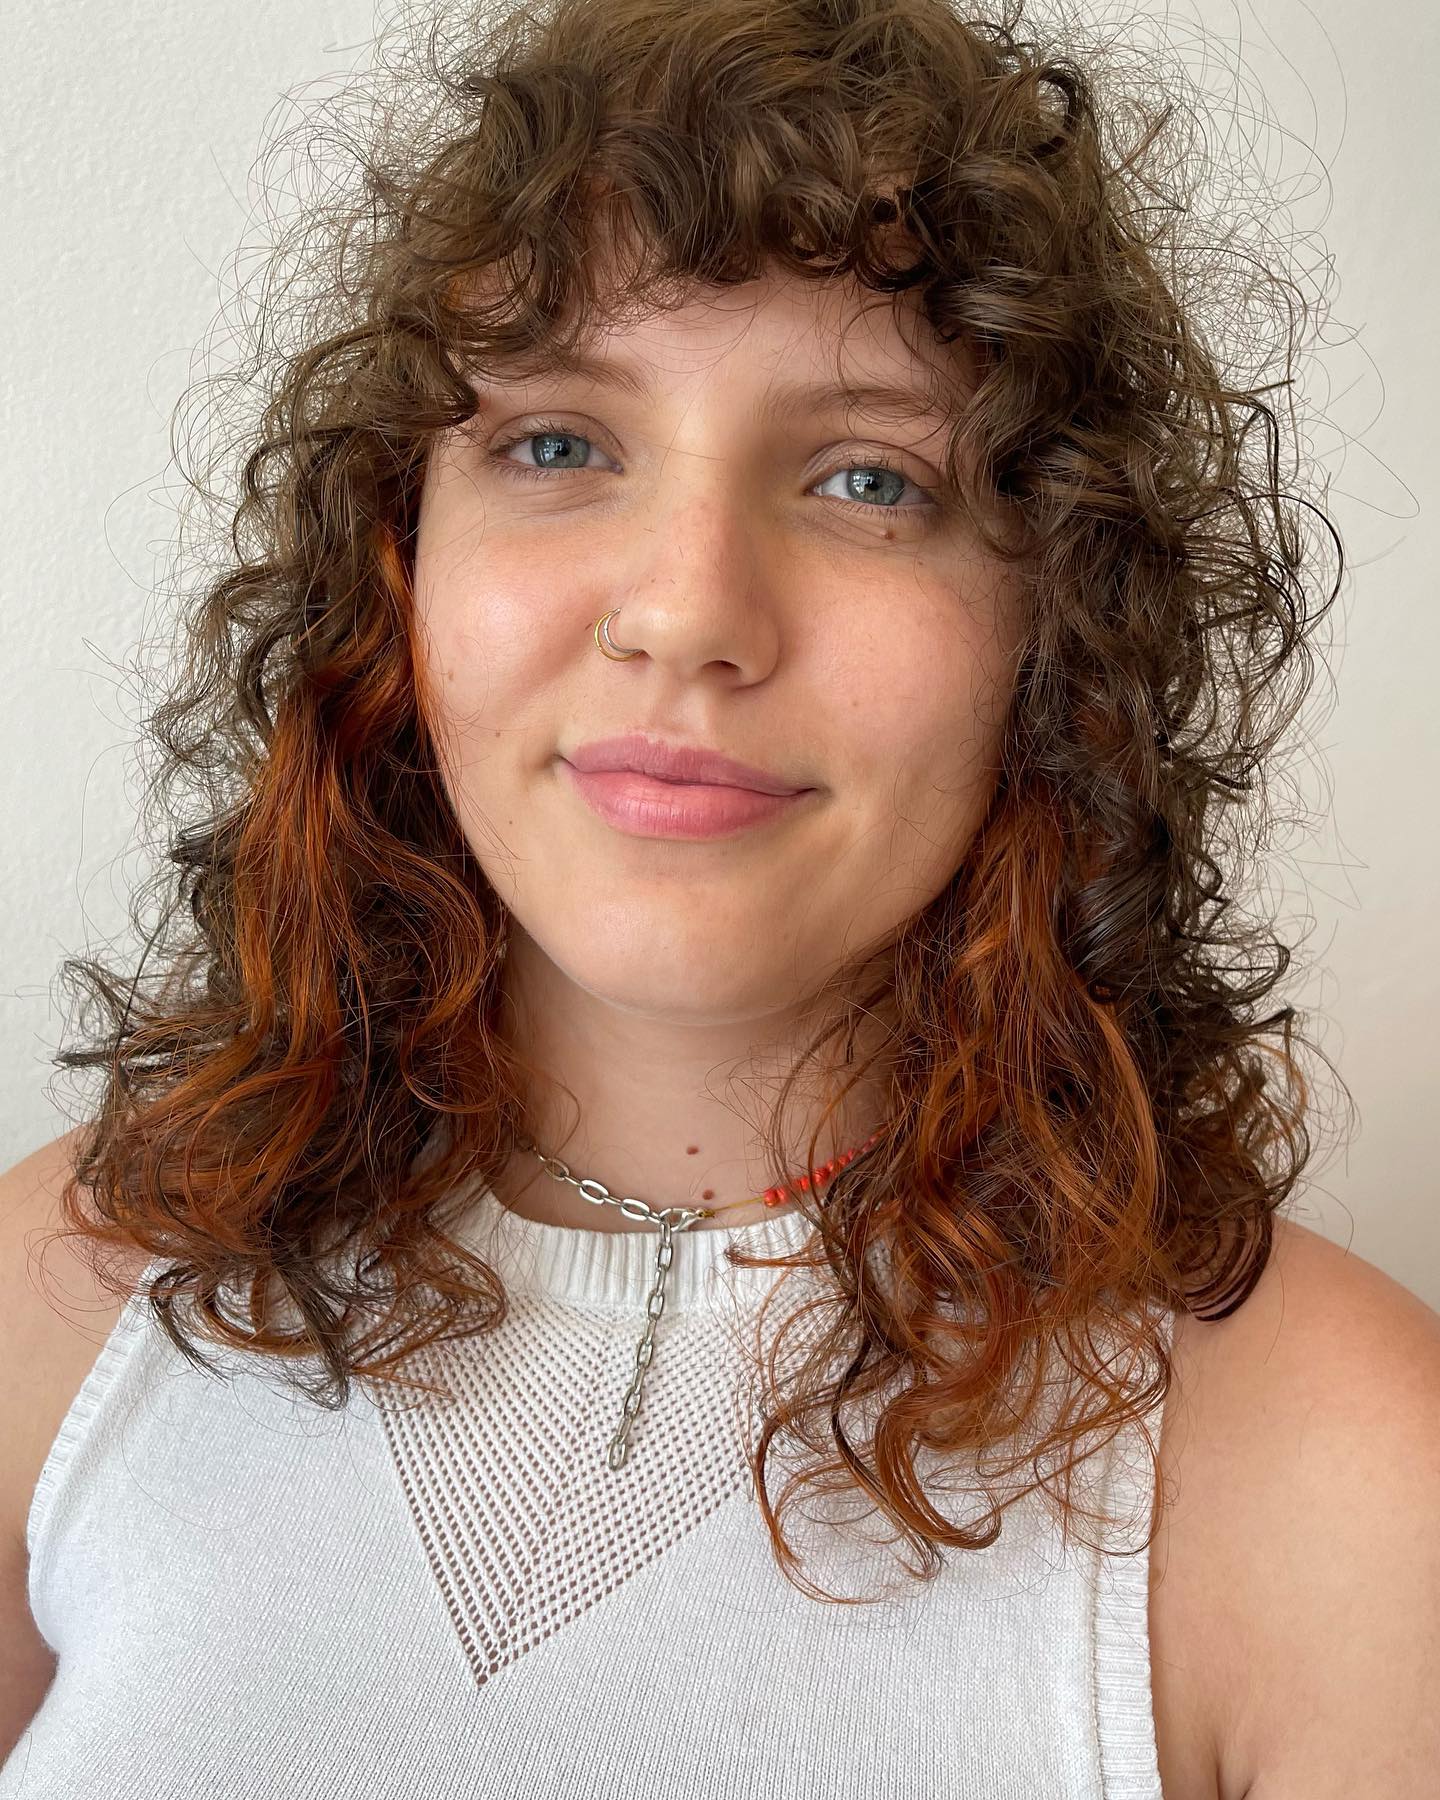 Curly Shag Hairstyle 98 Curly hair shaggy bob | Curly shag mullet | Medium length curly shags Curly Shag Hairstyles for Women